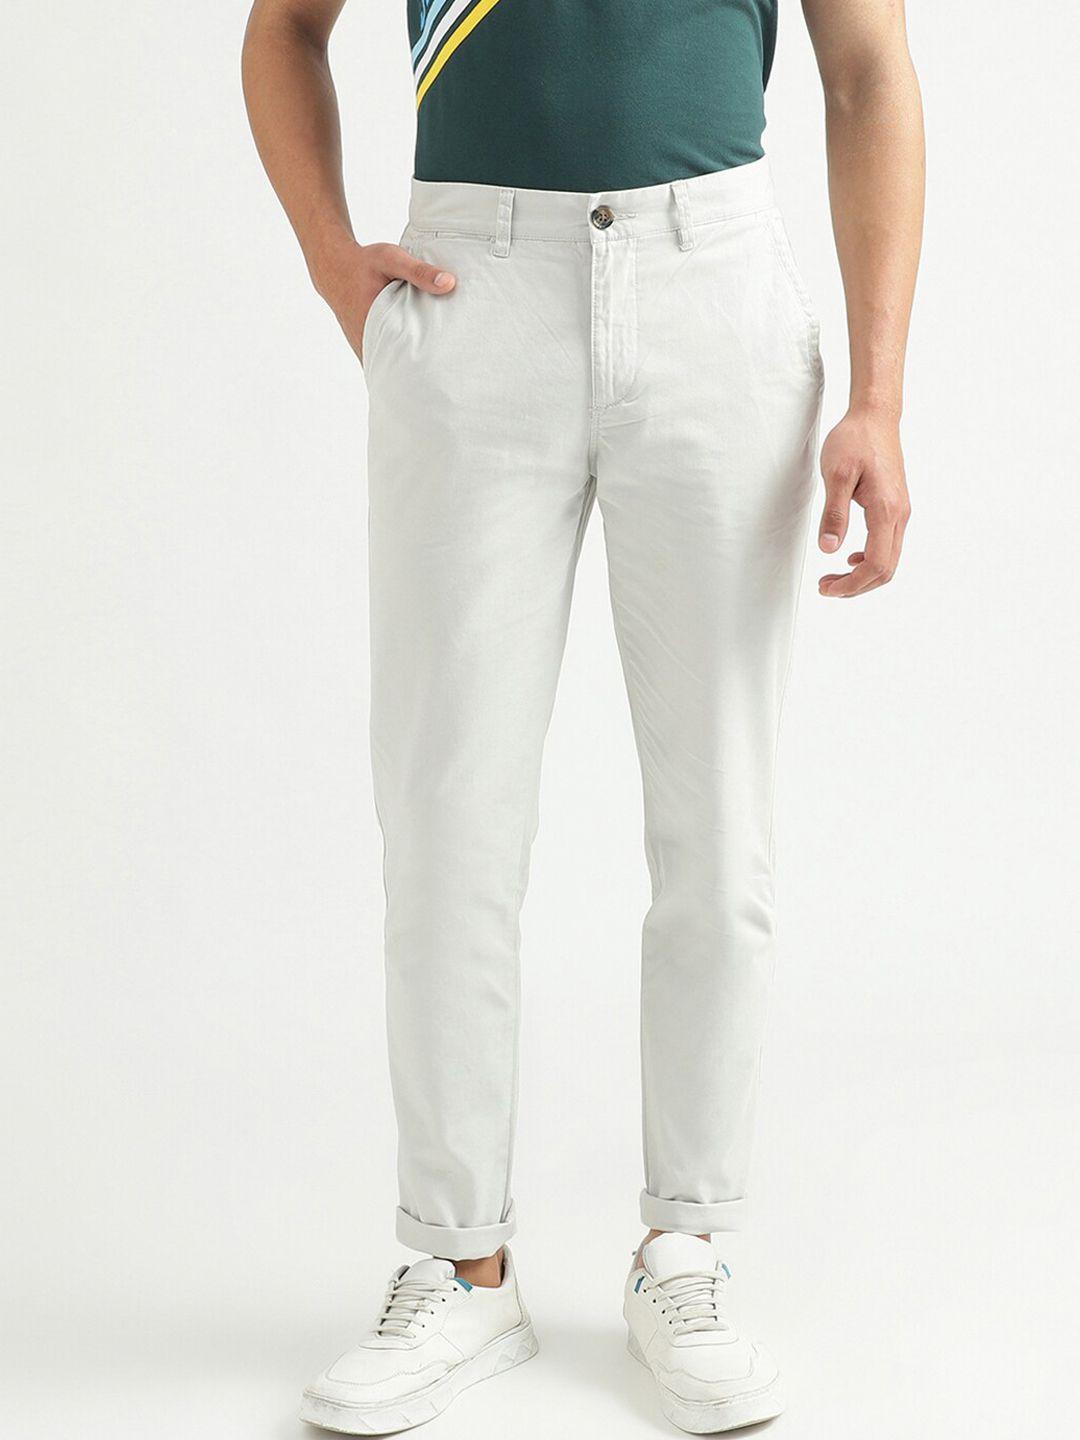 united-colors-of-benetton-men-white-slim-fit-chinos-trousers